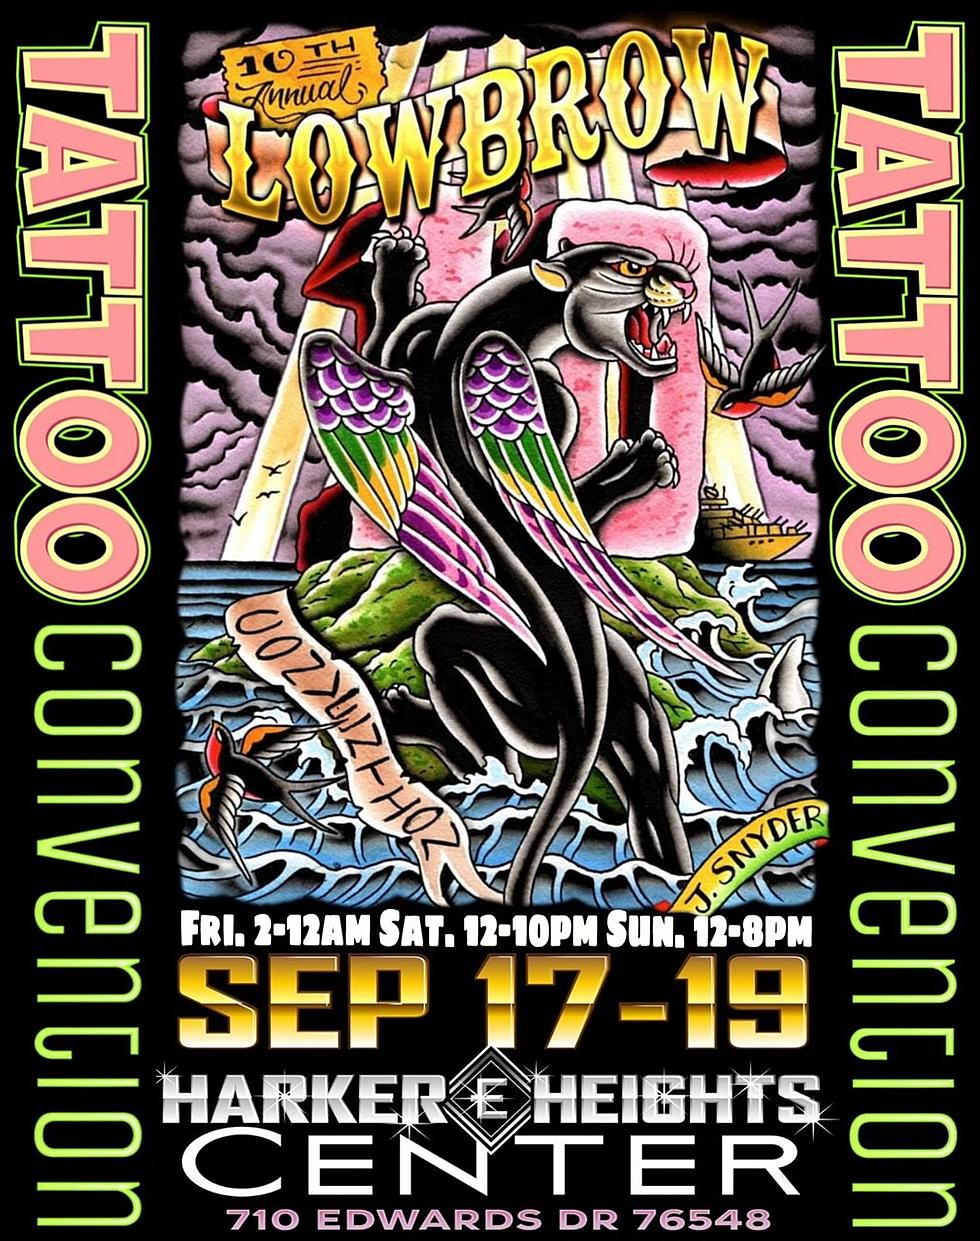 10th Annual Lowbrow Art and Tattoo Convention is Back at The Harker Heights E Center